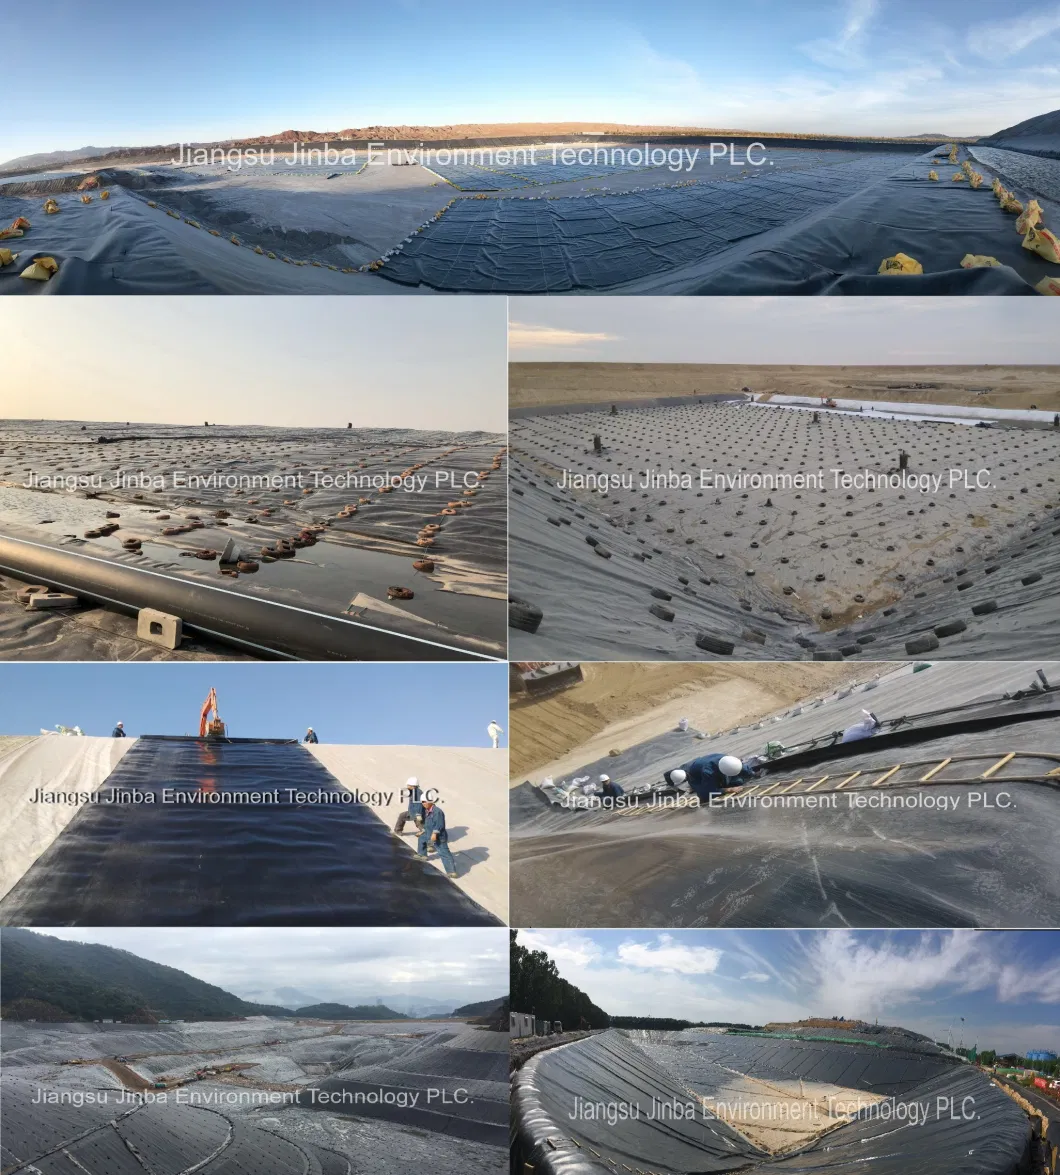 Thickness 1.0mm Waterproof Double-Sided Textured HDPE Geomembrane for Reservoir Dam Liner